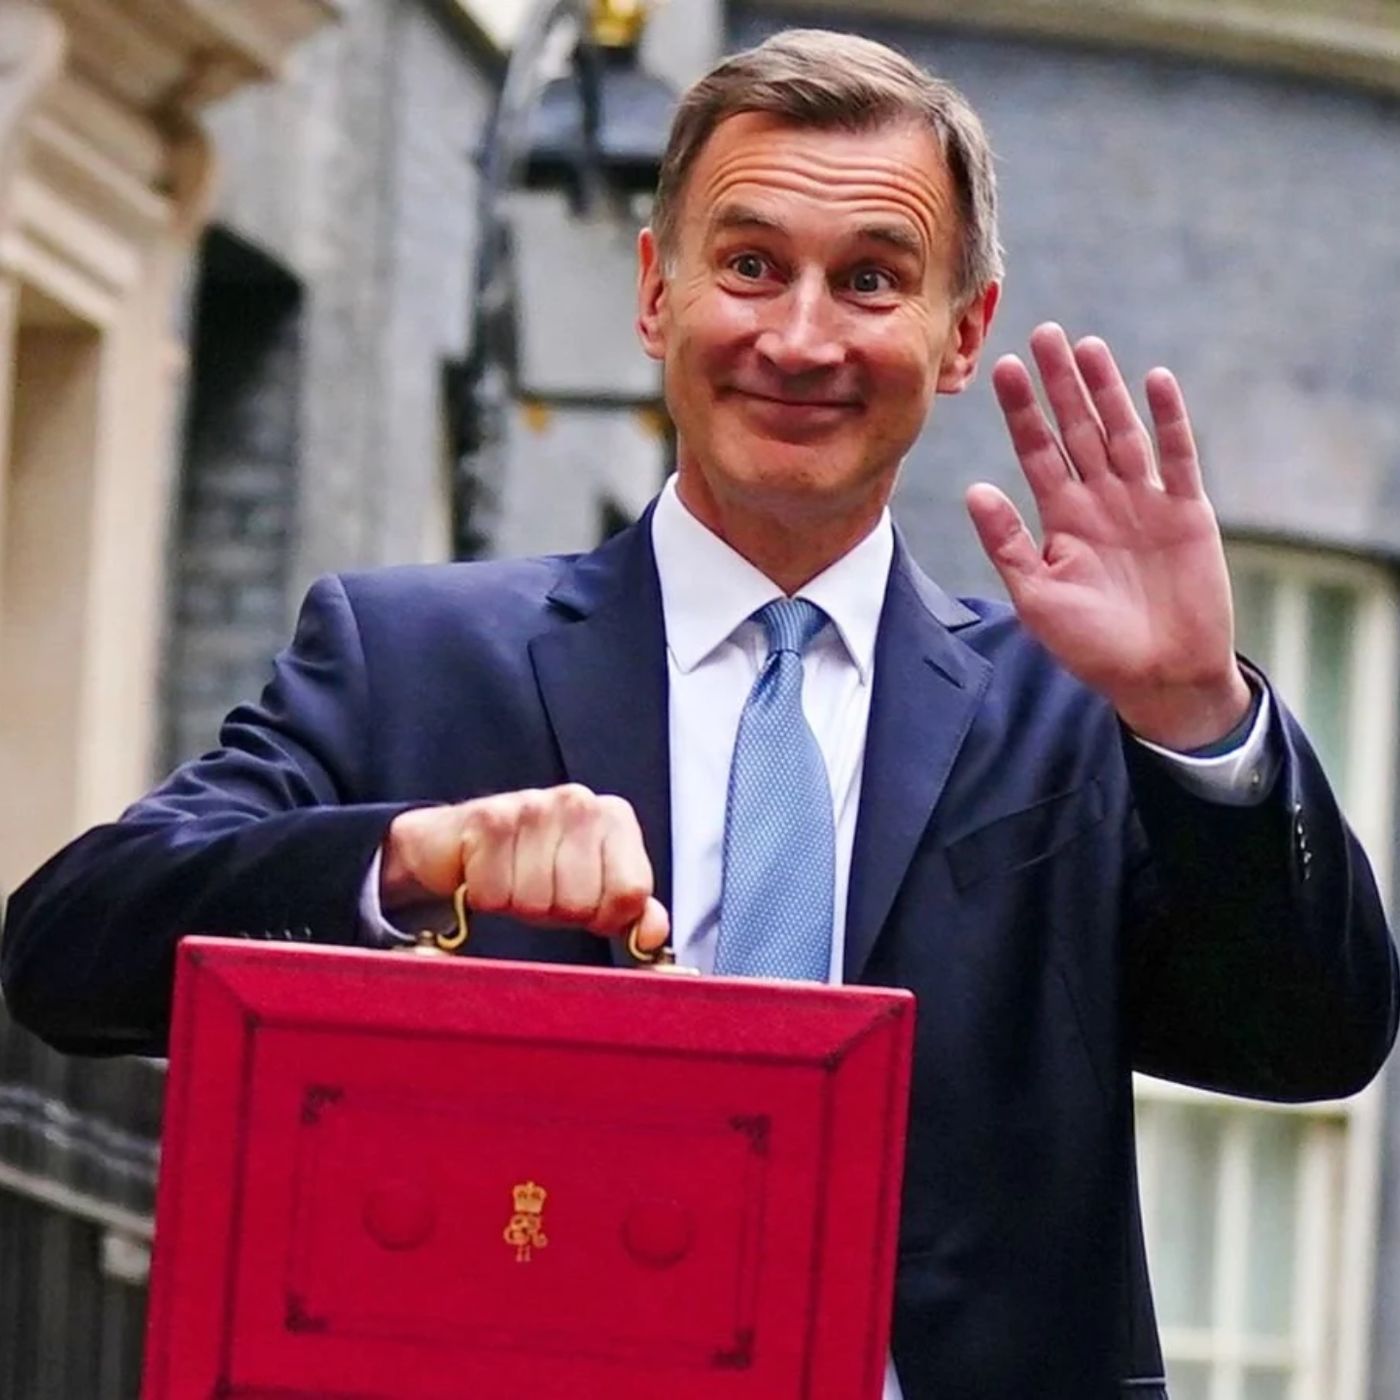 Why are households worse off after the budget?